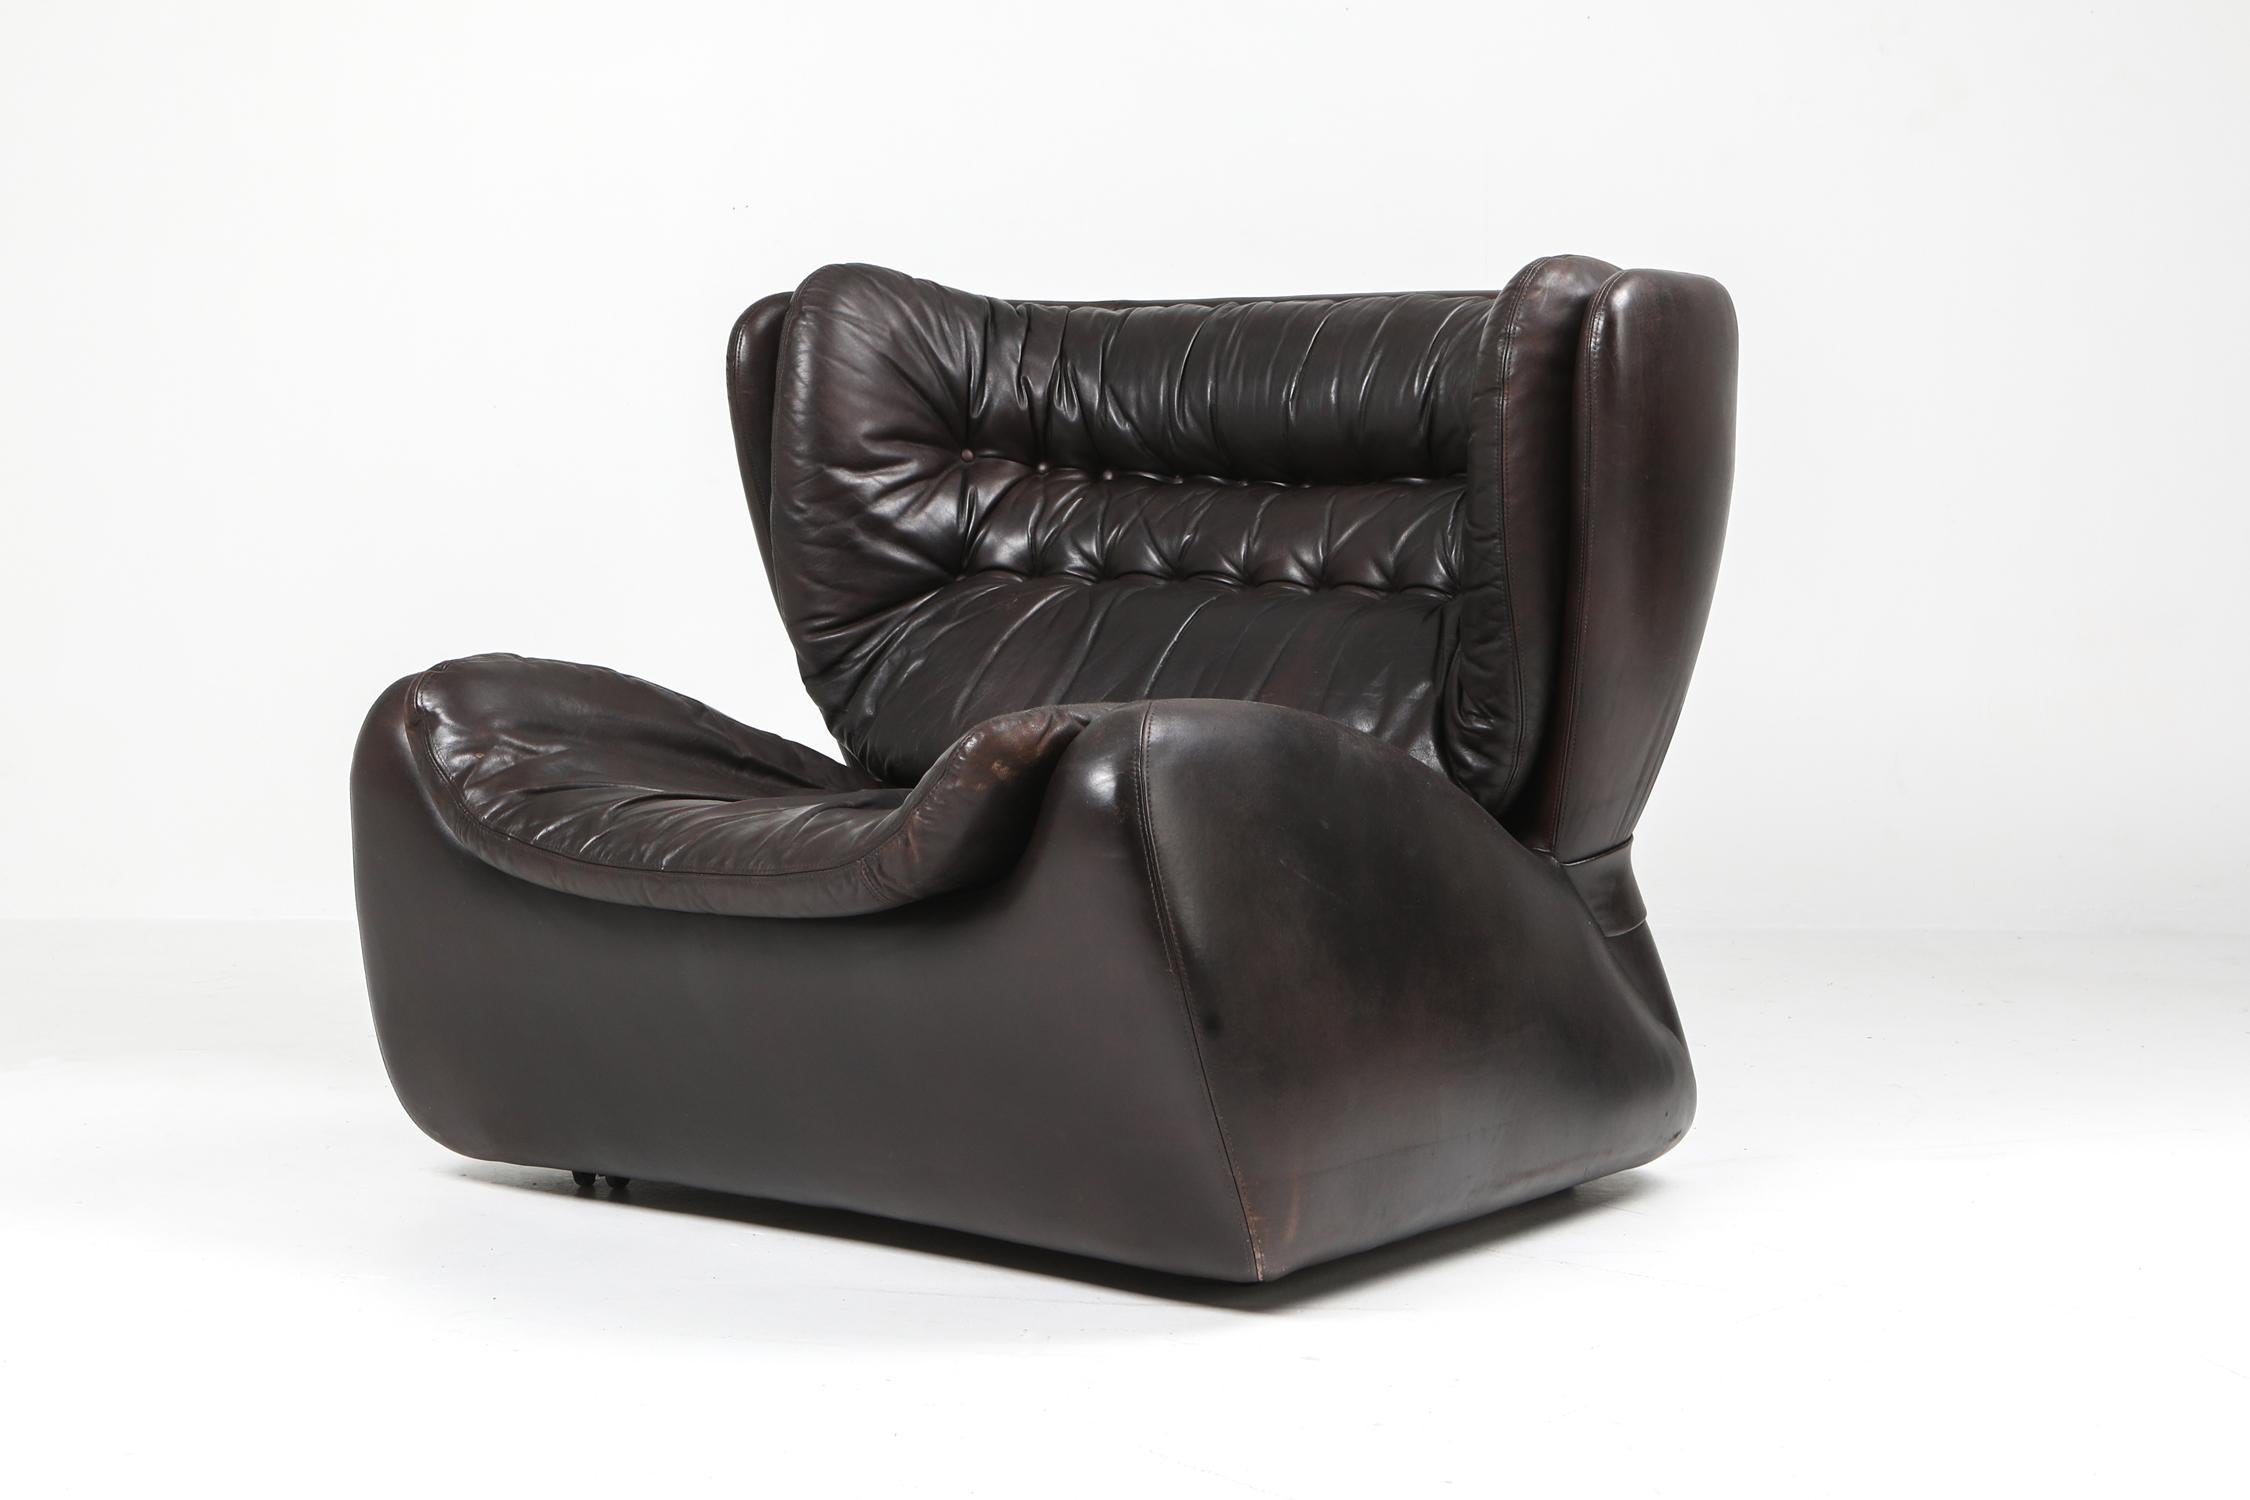 20th Century 1970s Belgian Lounge Chair with Ottoman 'Pasha' by Durlet For Sale